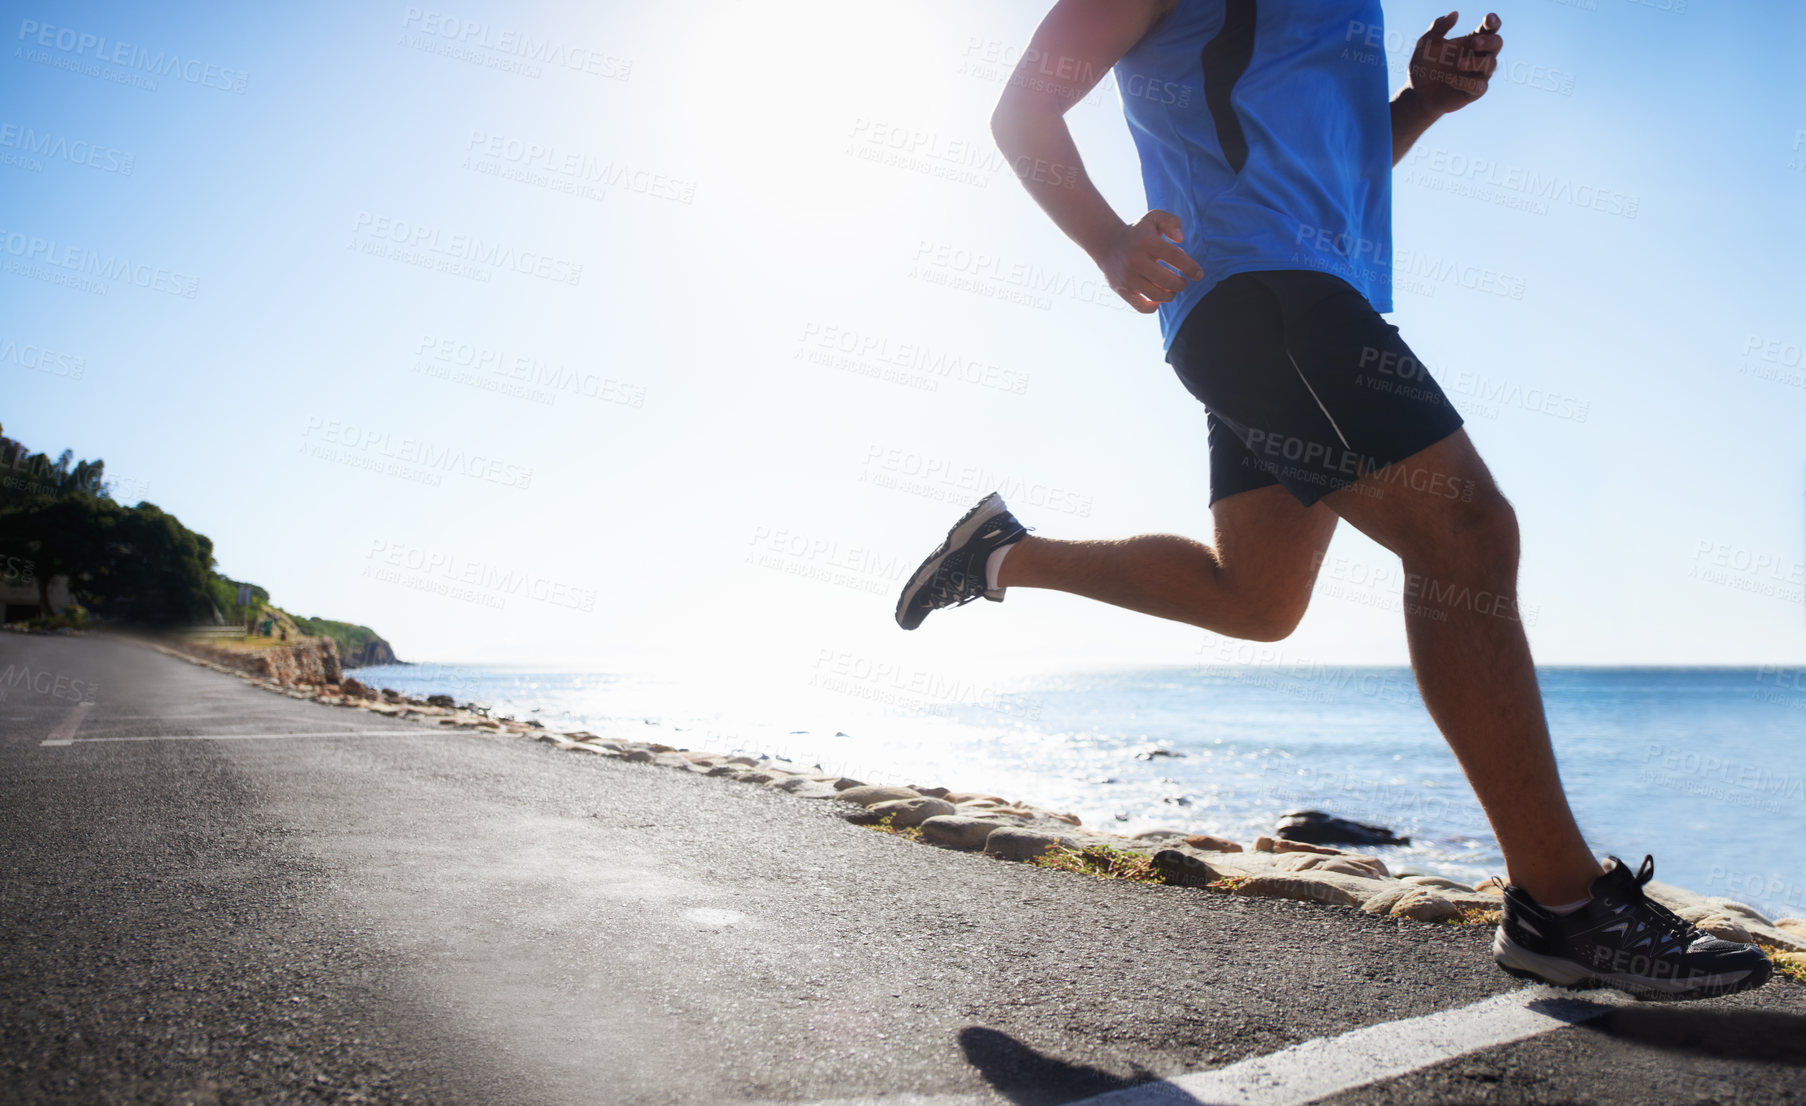 Buy stock photo Low angle view of a runner next to the ocean